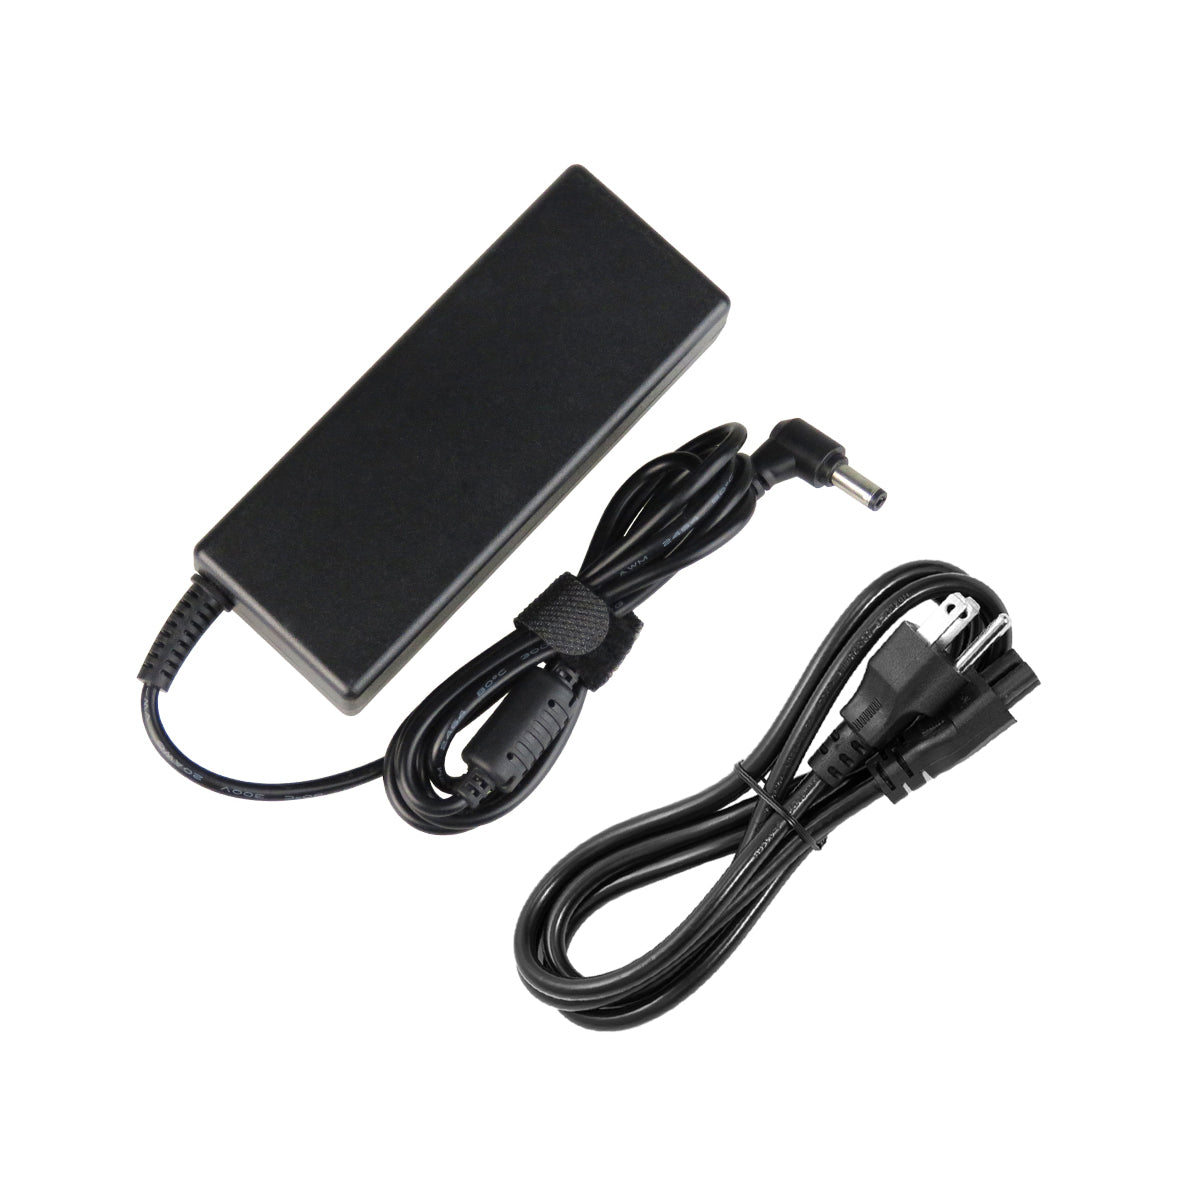 AC Adapter Charger for Toshiba Satellite c50 Notebook.